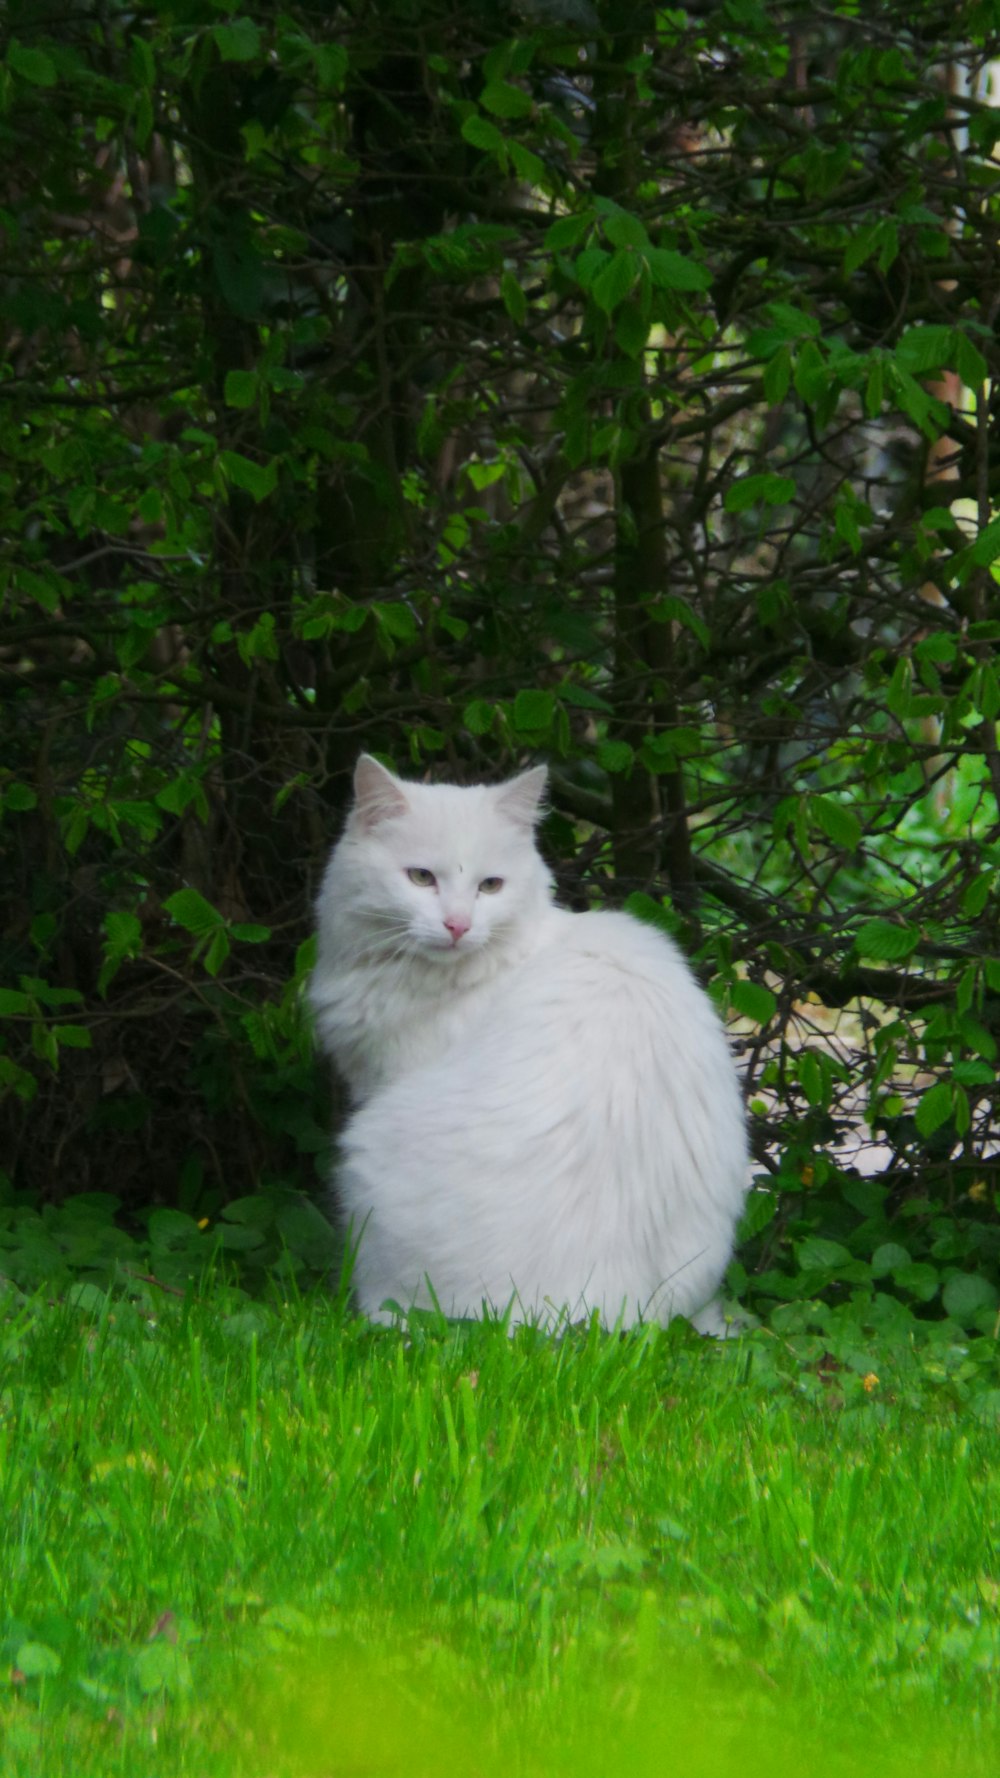 large white cat by grass leafed plant during daytime